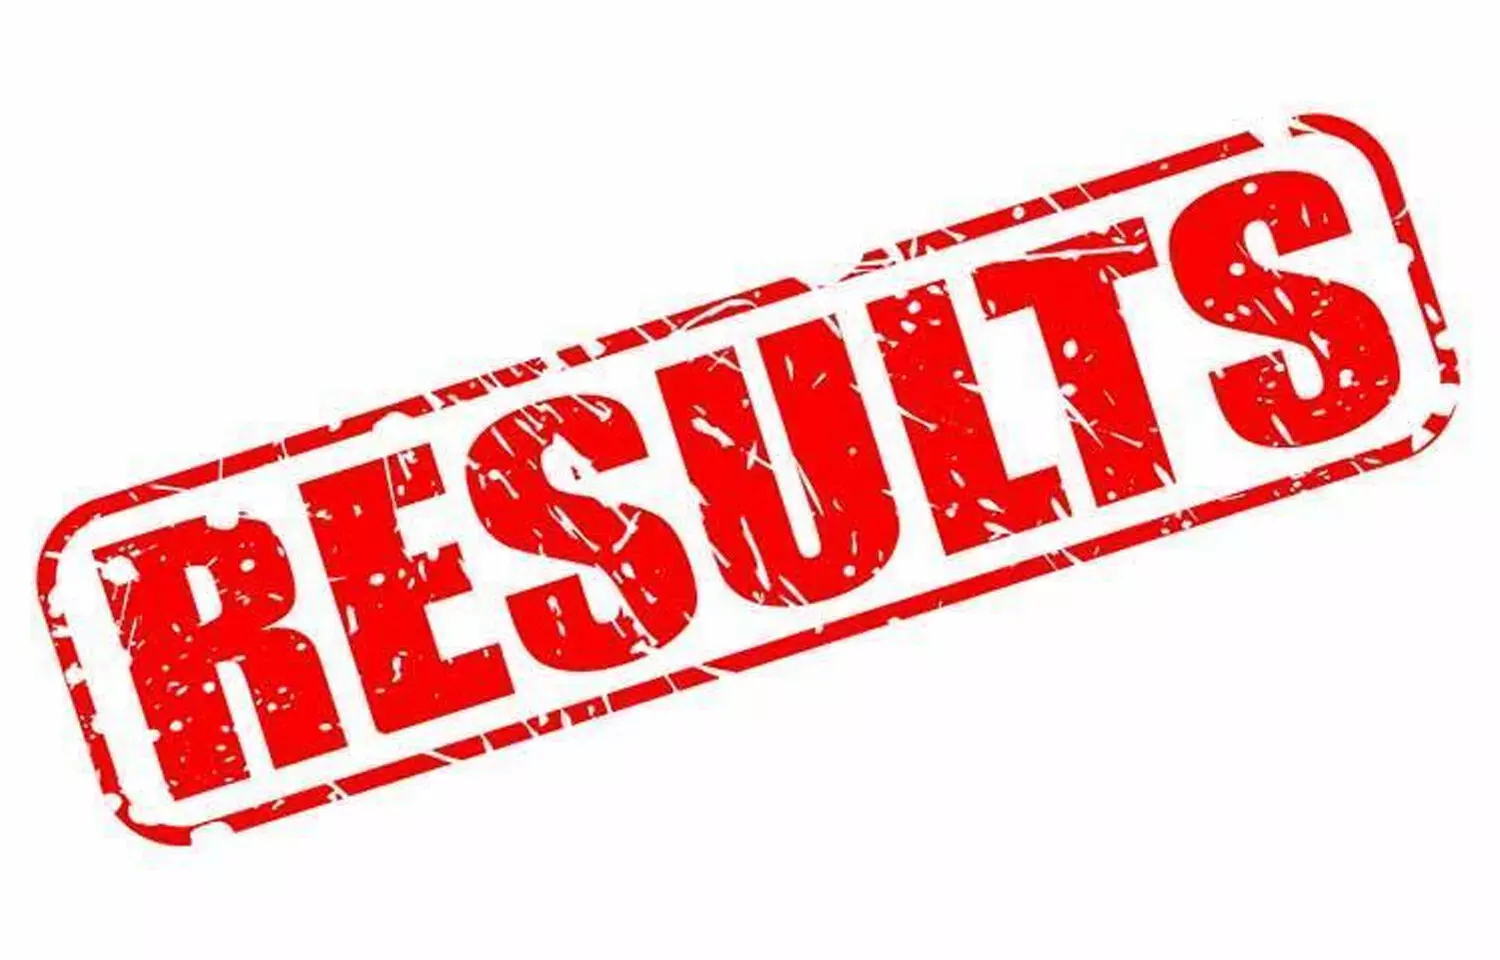 AIIMS PhD January 202 admissions: Final results released